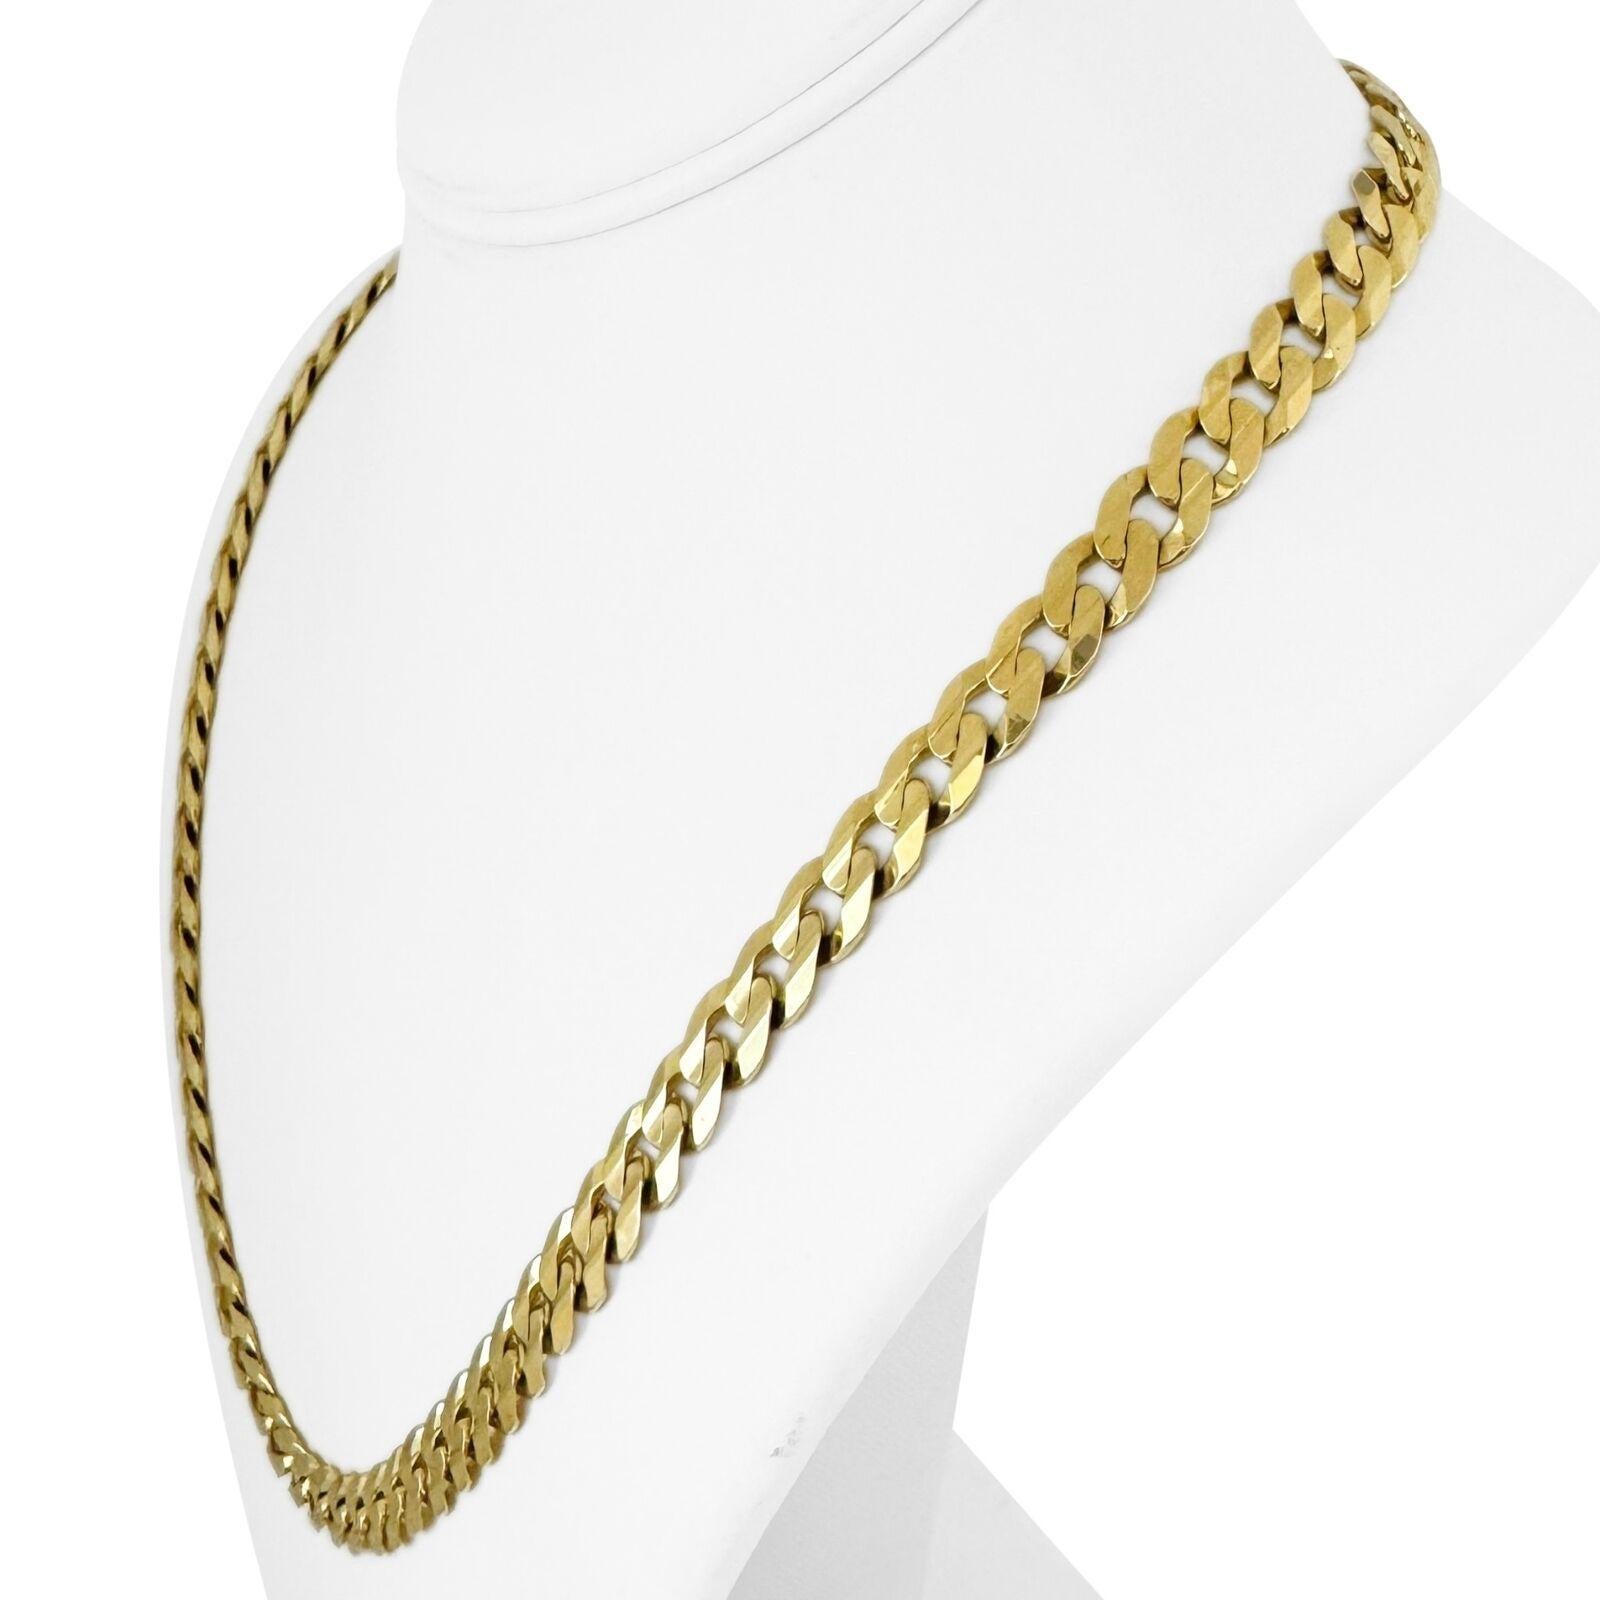 10k Yellow Gold 47g Solid Men's 8mm Curb Link Chain Necklace Turkey 22